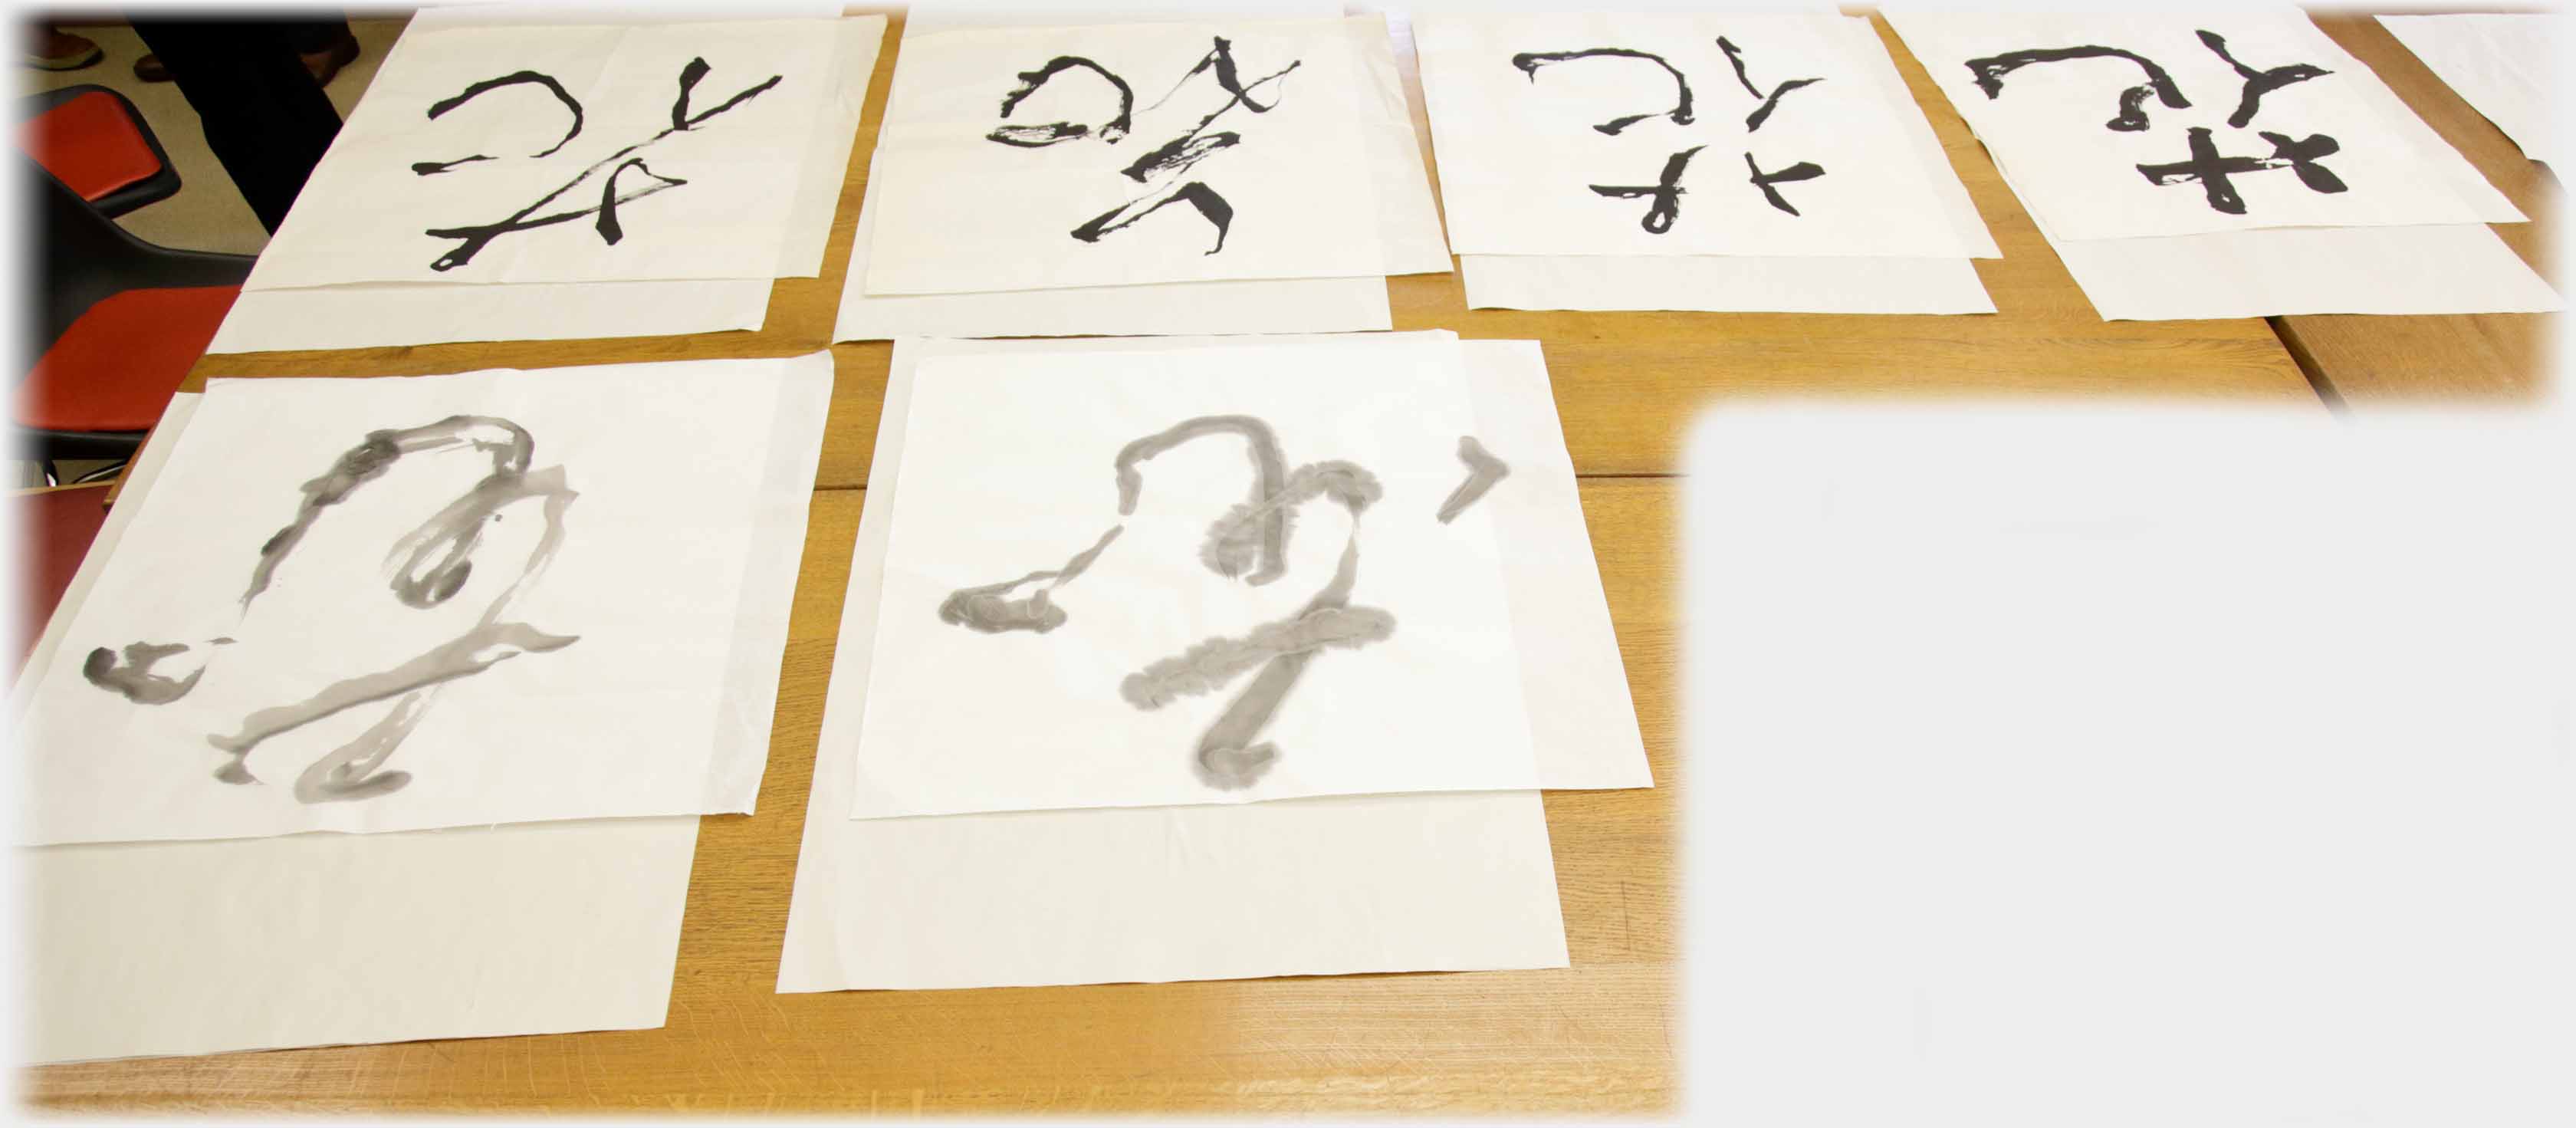 Six characters on large sheets of paper laid on table.